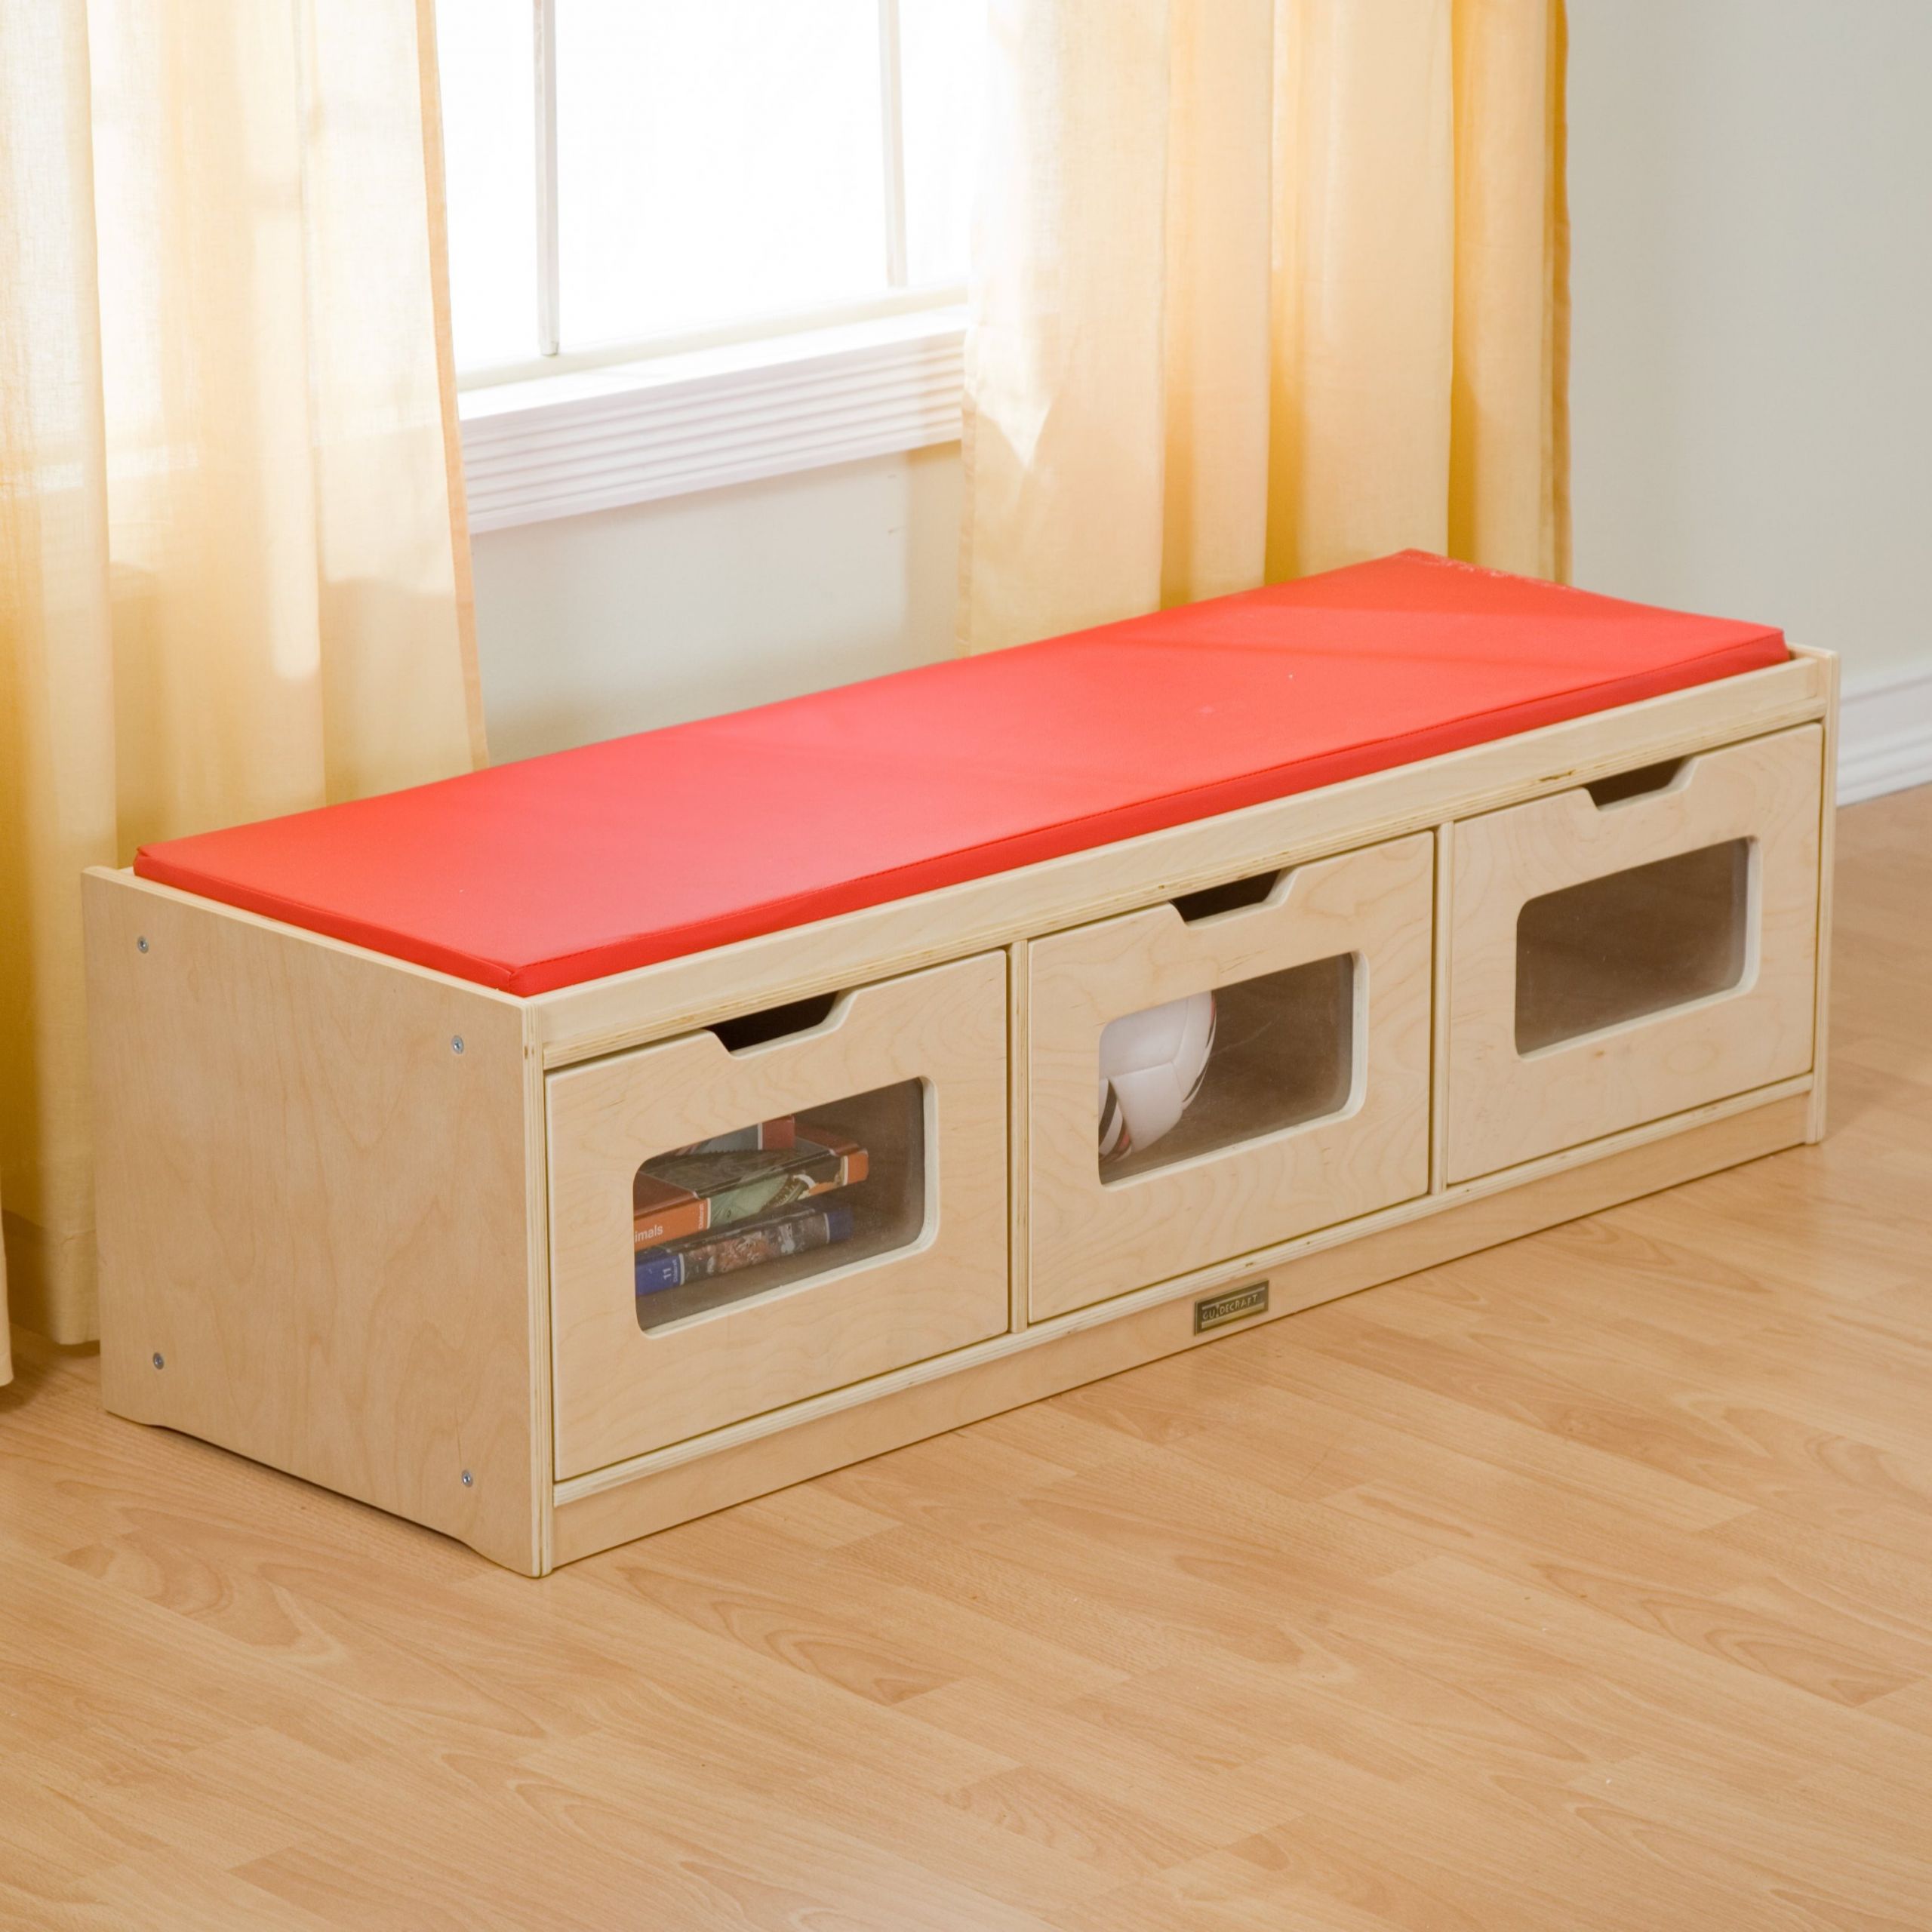 Bench Storage Seat
 Long Bench With Storage – HomesFeed